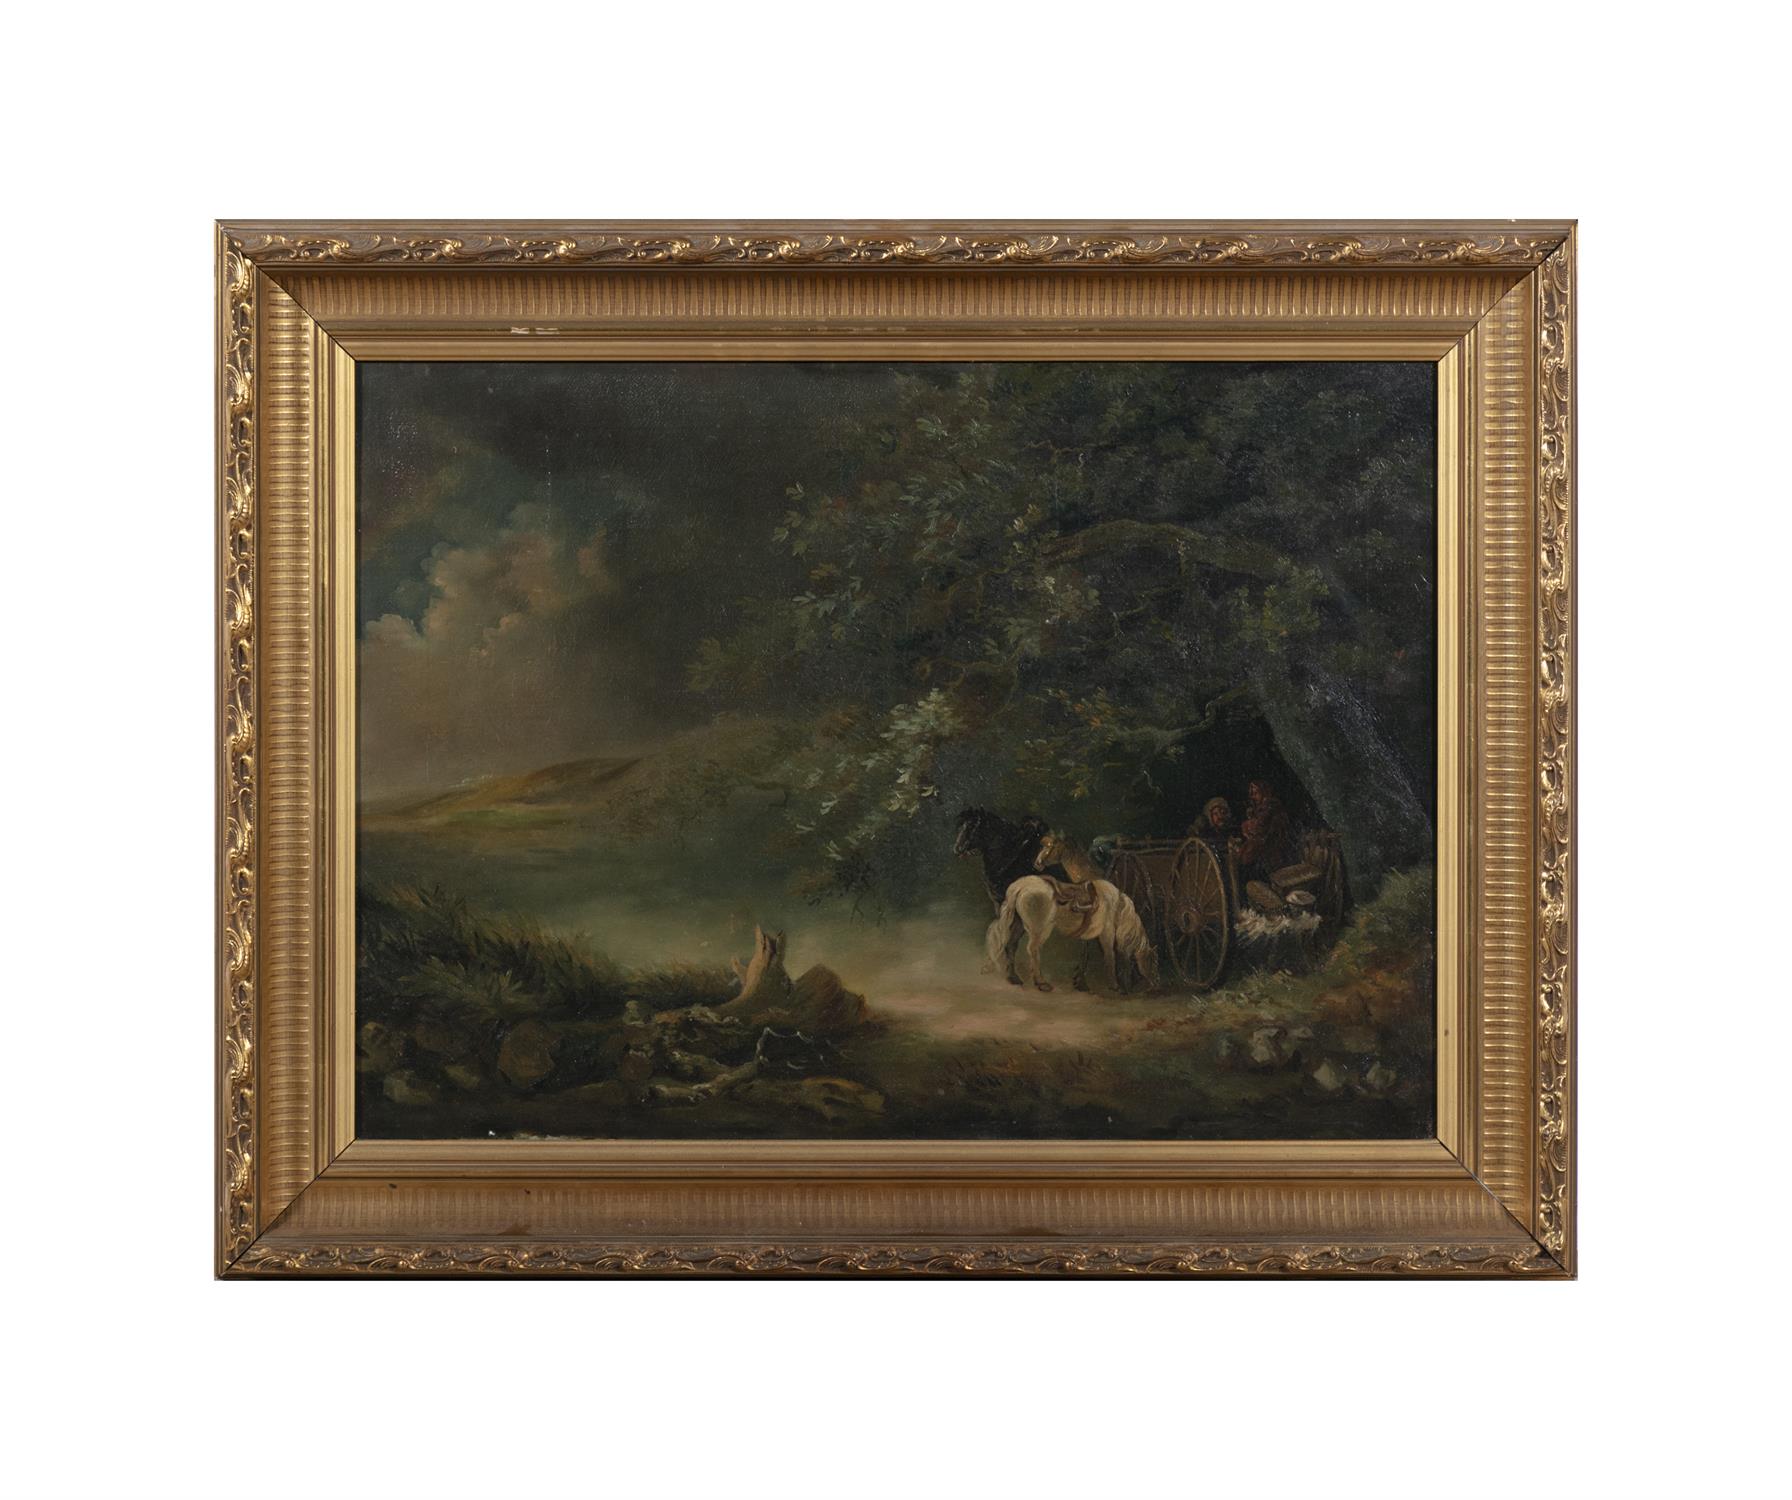 ENGLISH SCHOOL,19TH CENTURY A Wooded Landscape With Travellers Beside a Cart and Horses,